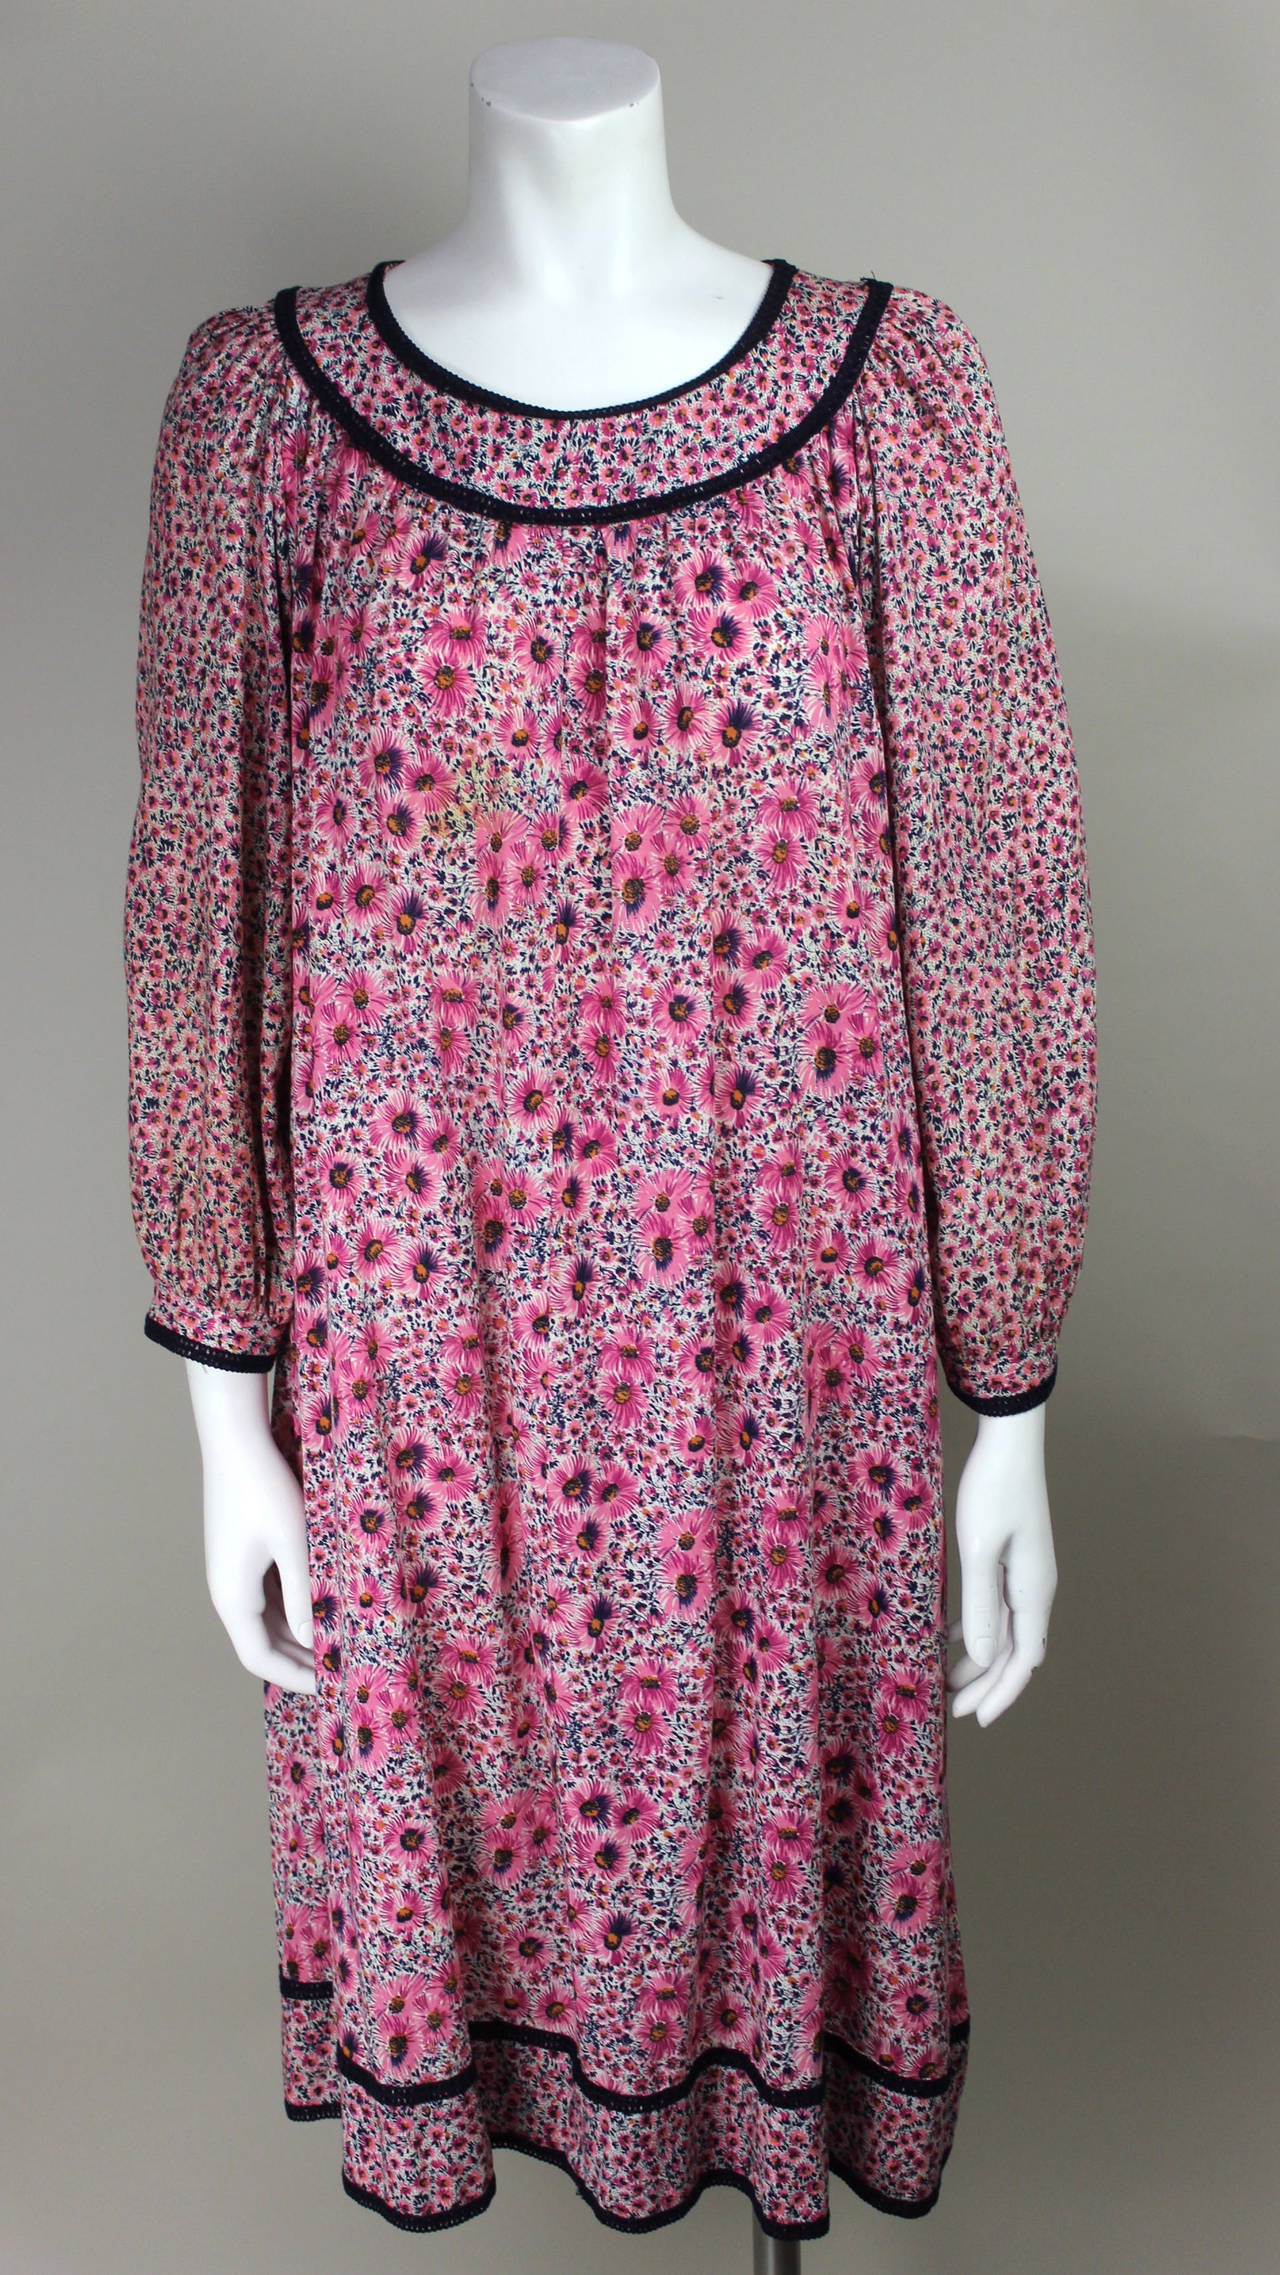 In the late 1960s, moving away from his early space age tailoring, Ungaro became renowned as a colorist. Using softer, more fluid fabrics, Ungaro created his pret-a-porter line Ungaro Parallele in 1968. This dress has graceful; generous draping and